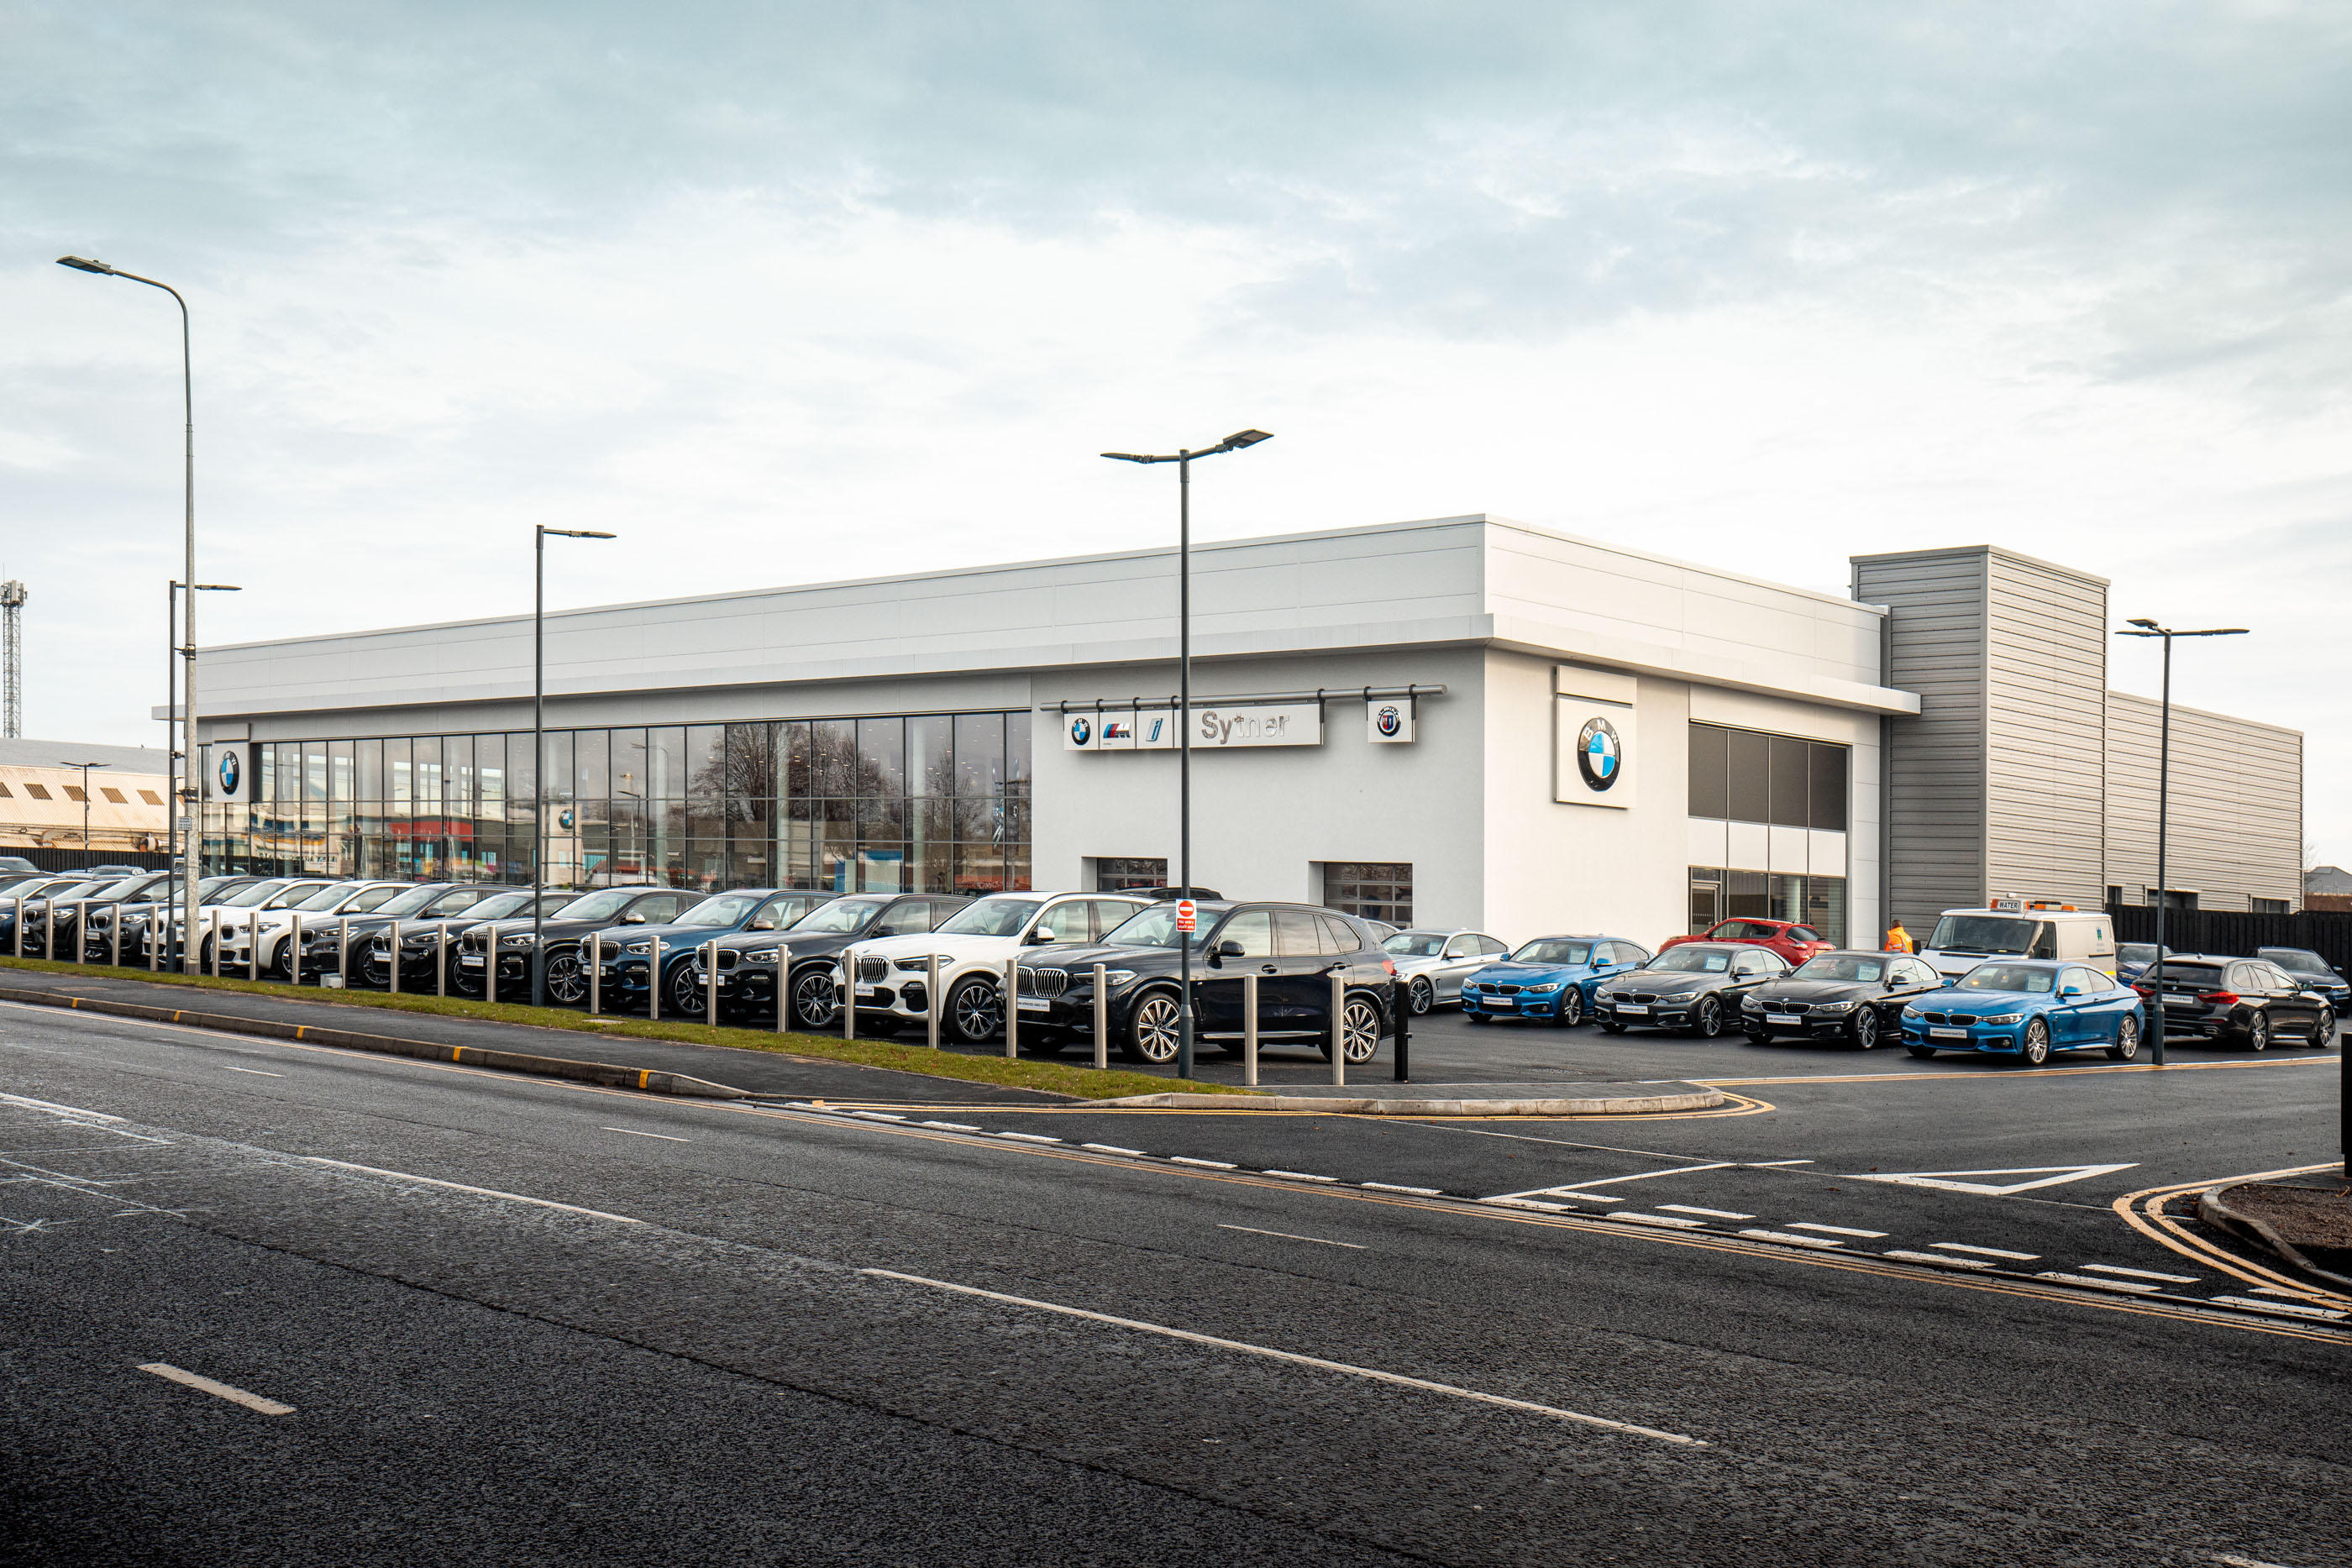 Images Sytner Cardiff BMW